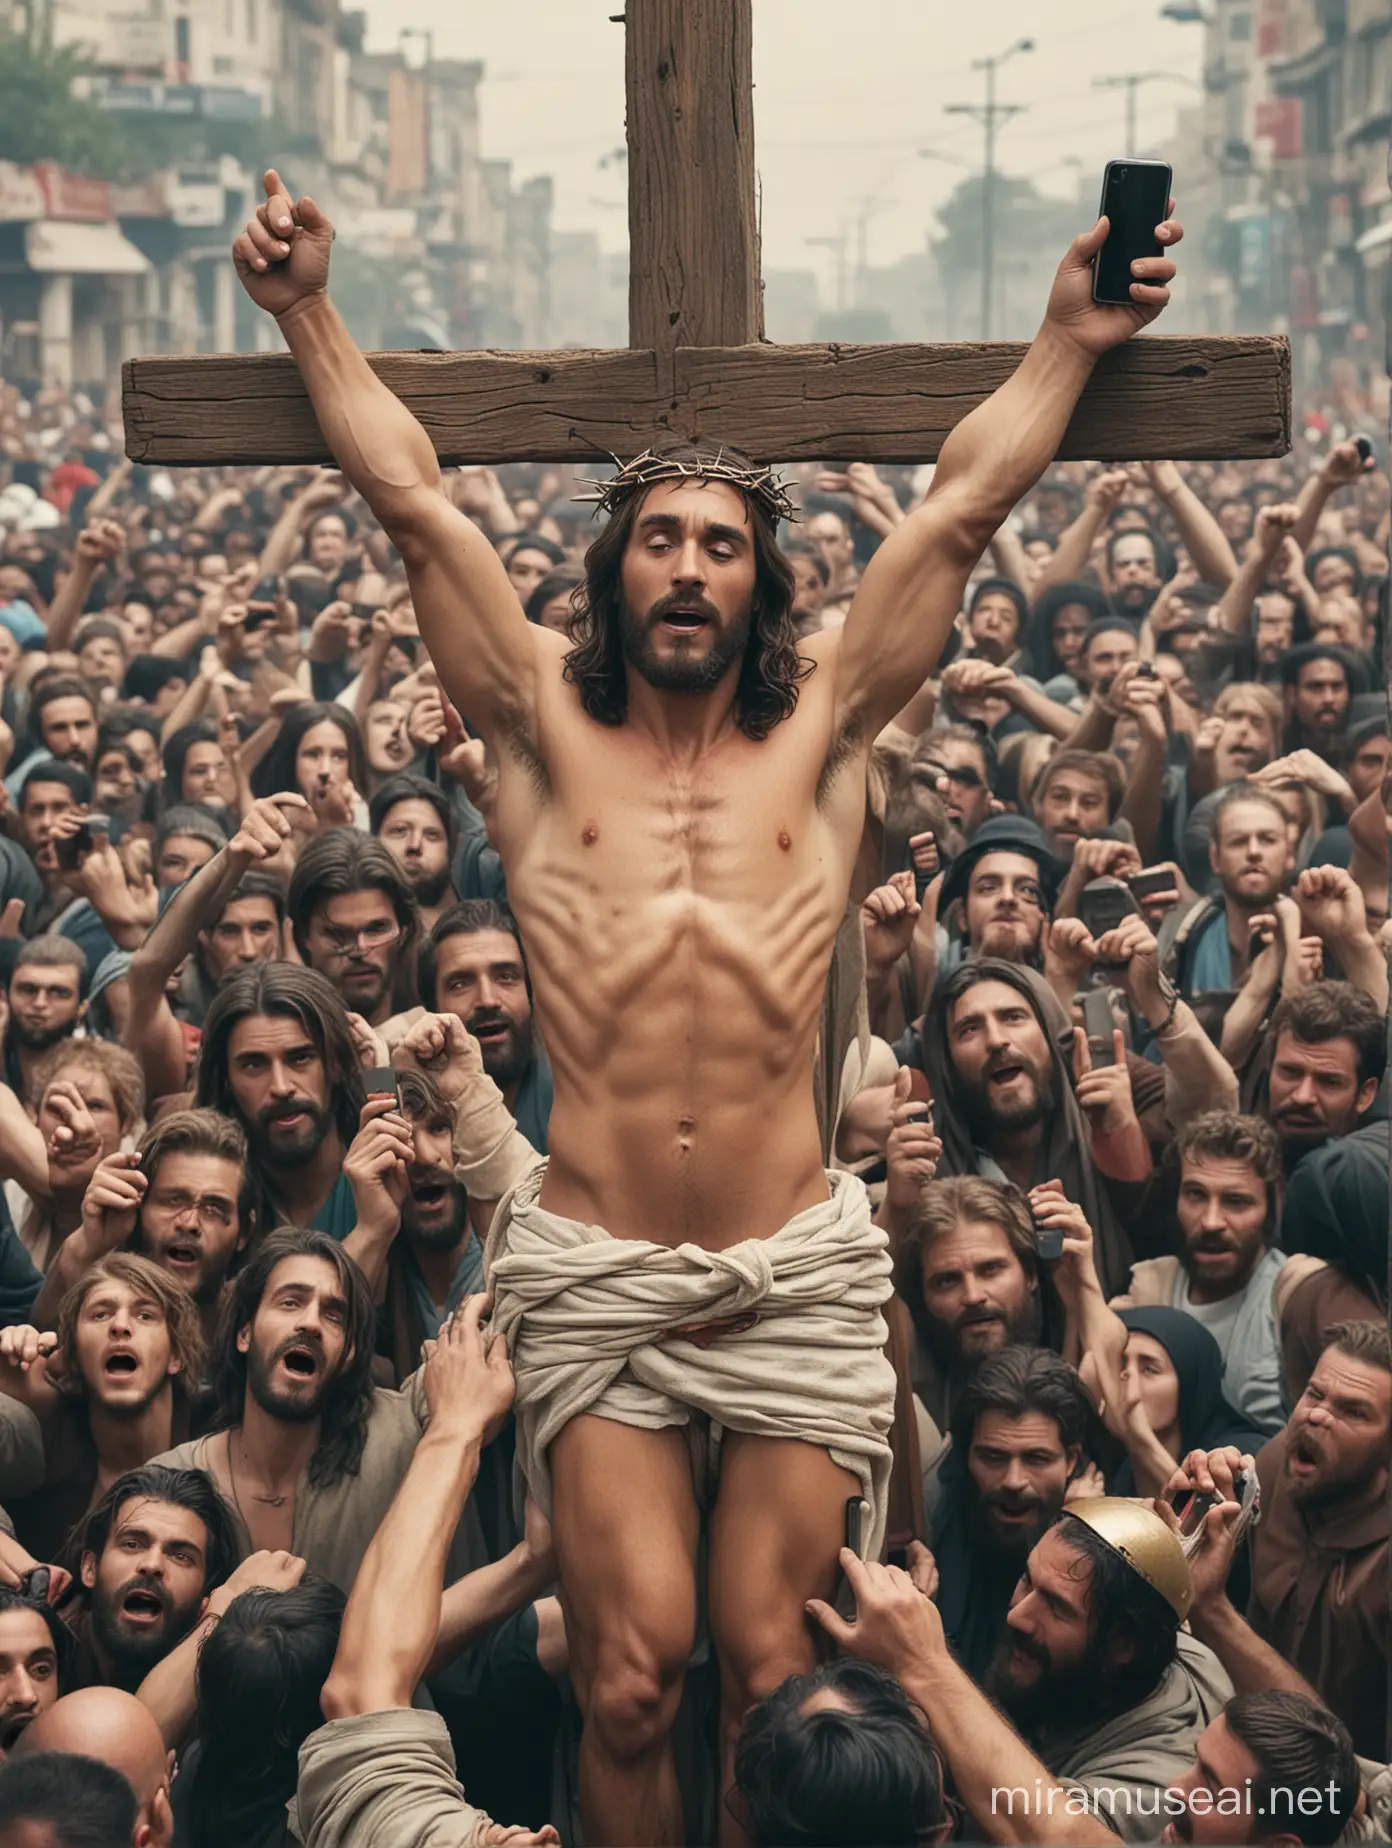 Modern Crowd Ignoring Jesus on the Cross with Two Thieves Symbolism in a Digital Age